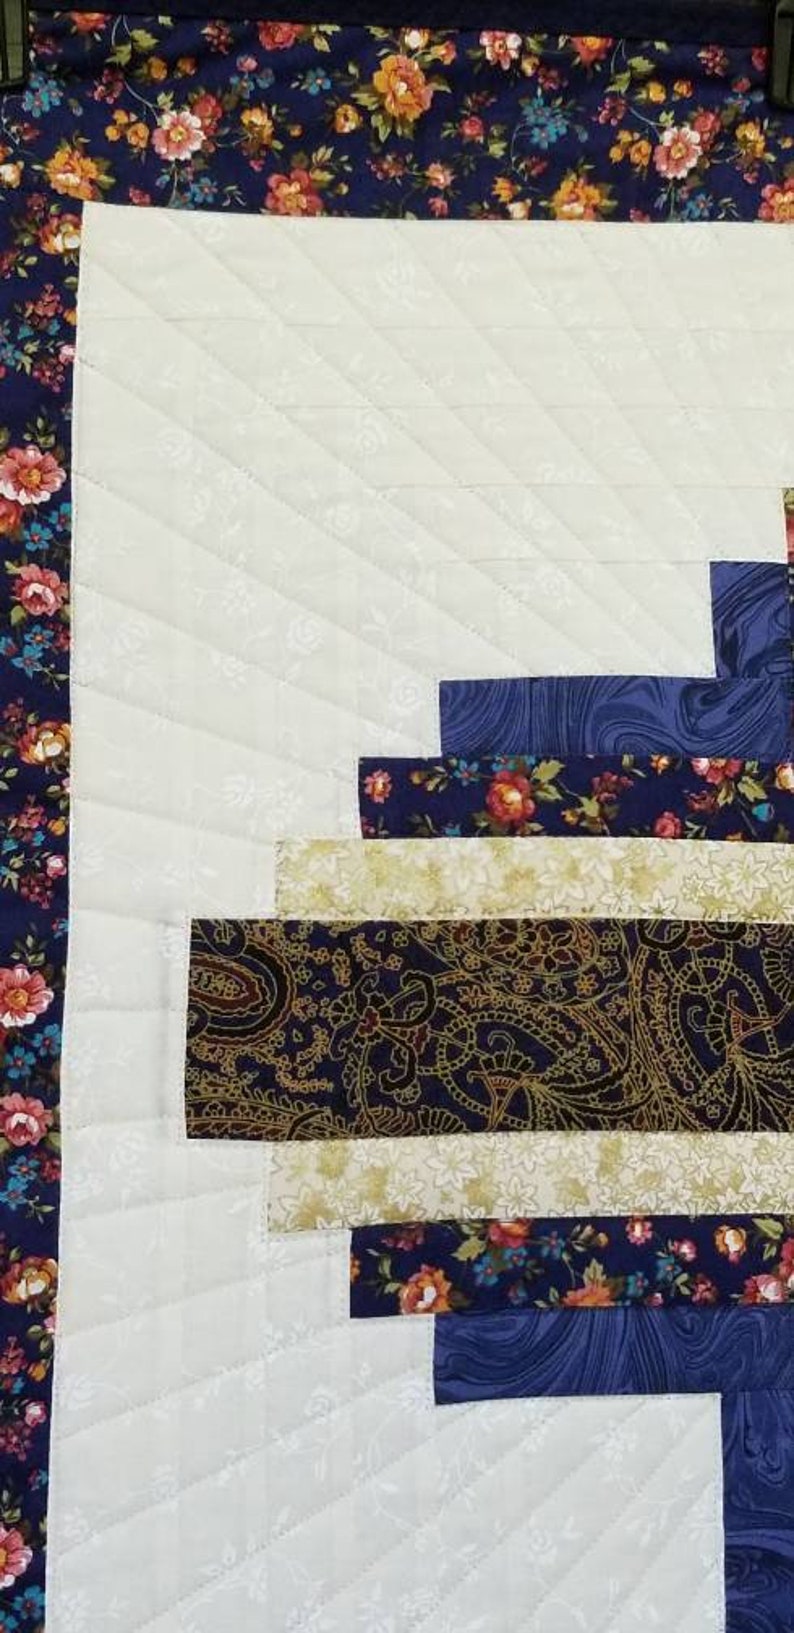 Log Cabin Cross 30 x 40 Wall Lap Table Small Quilt in Navy Blue Gold Metallic and Cream 100% Cotton Fabric. Features Sun Ray's quilting. image 3